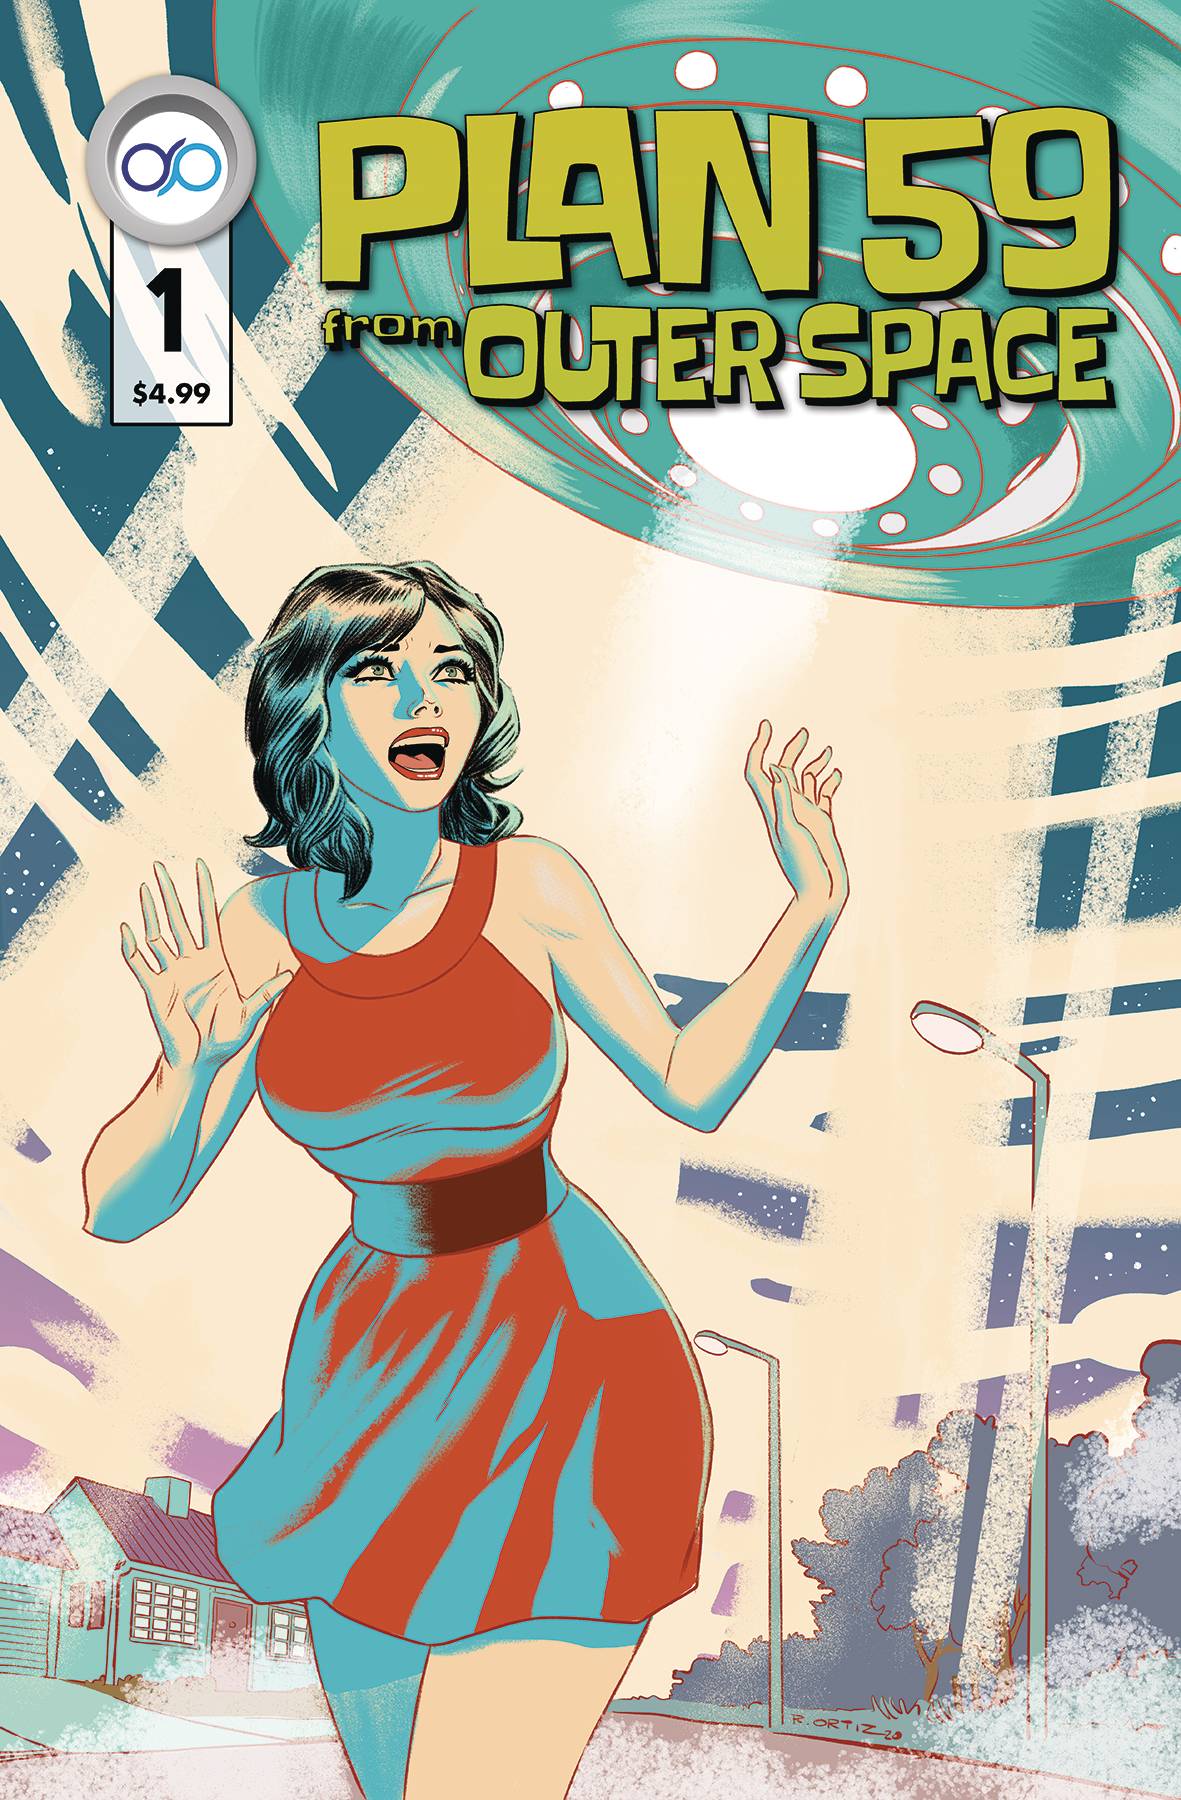 Plan 59 From Outer Space #1 (Of 3) (Mr) (03/29/2023)